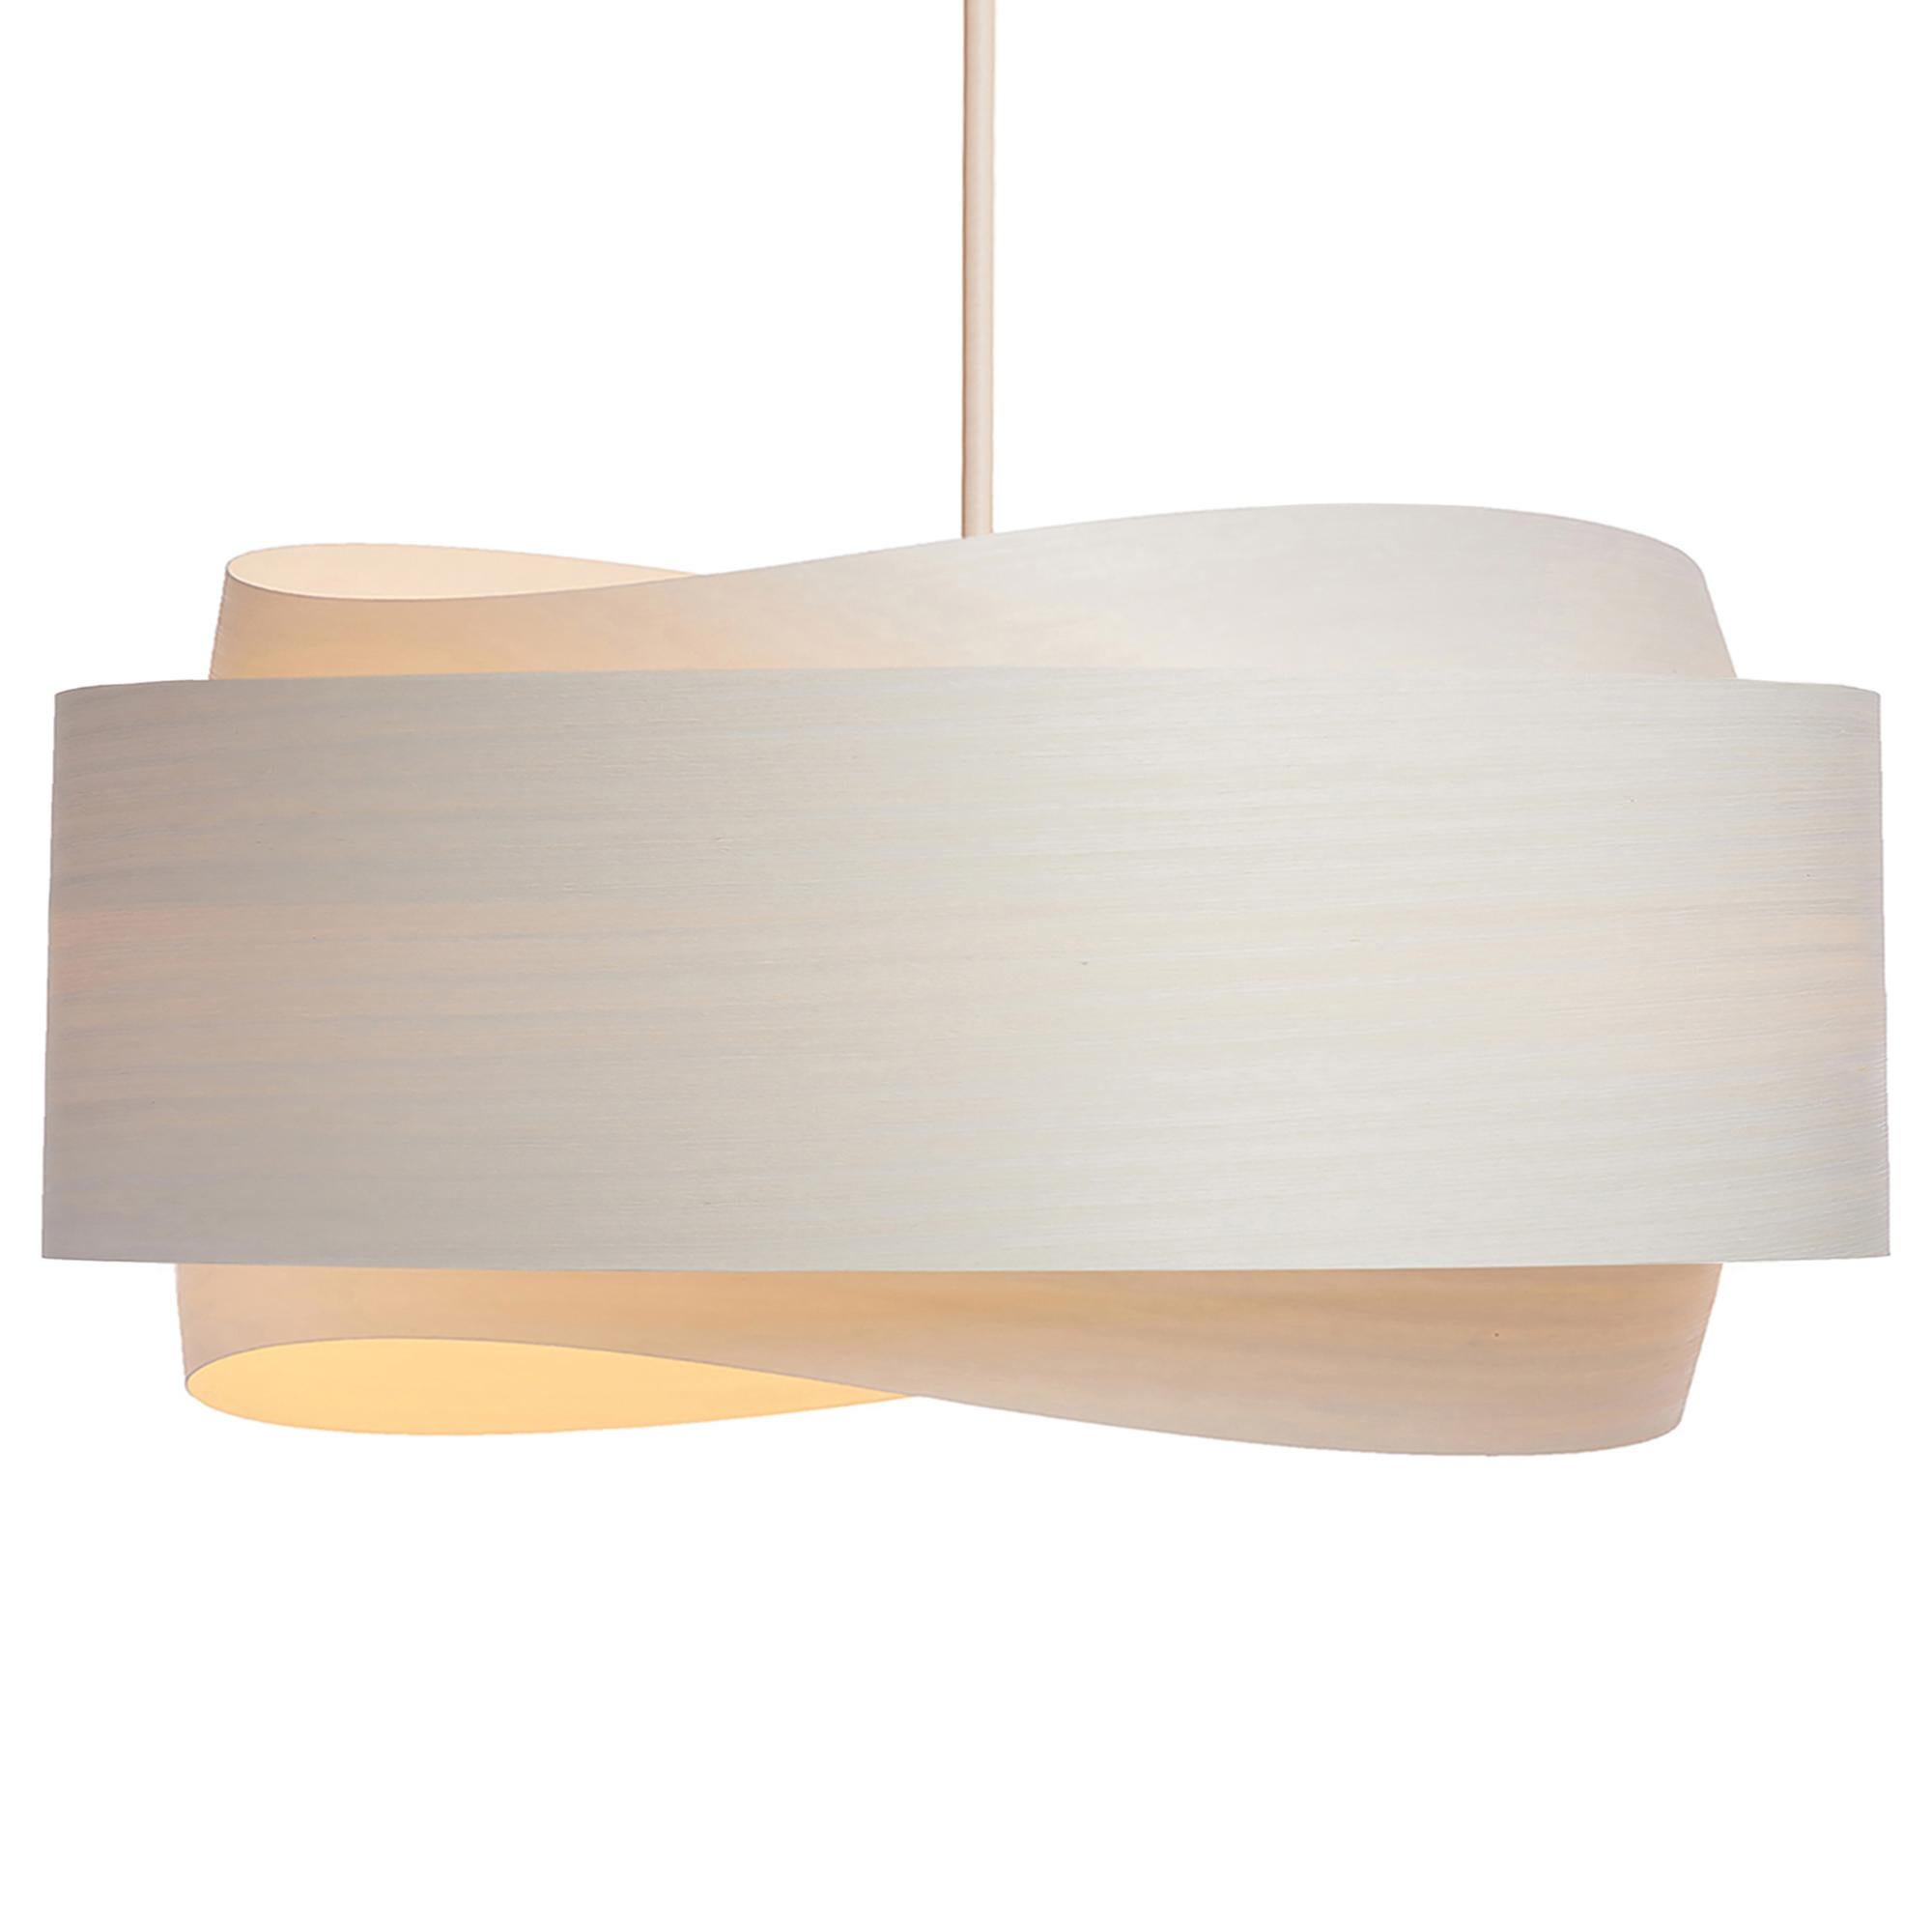 The BOWEN light fixture is a stunning example of contemporary Mid-Century Modern design. With its minimalist silhouette, warm white tones, and unique shape, this pendant light is sure to add a touch of sophistication to any space.

The BOWEN light